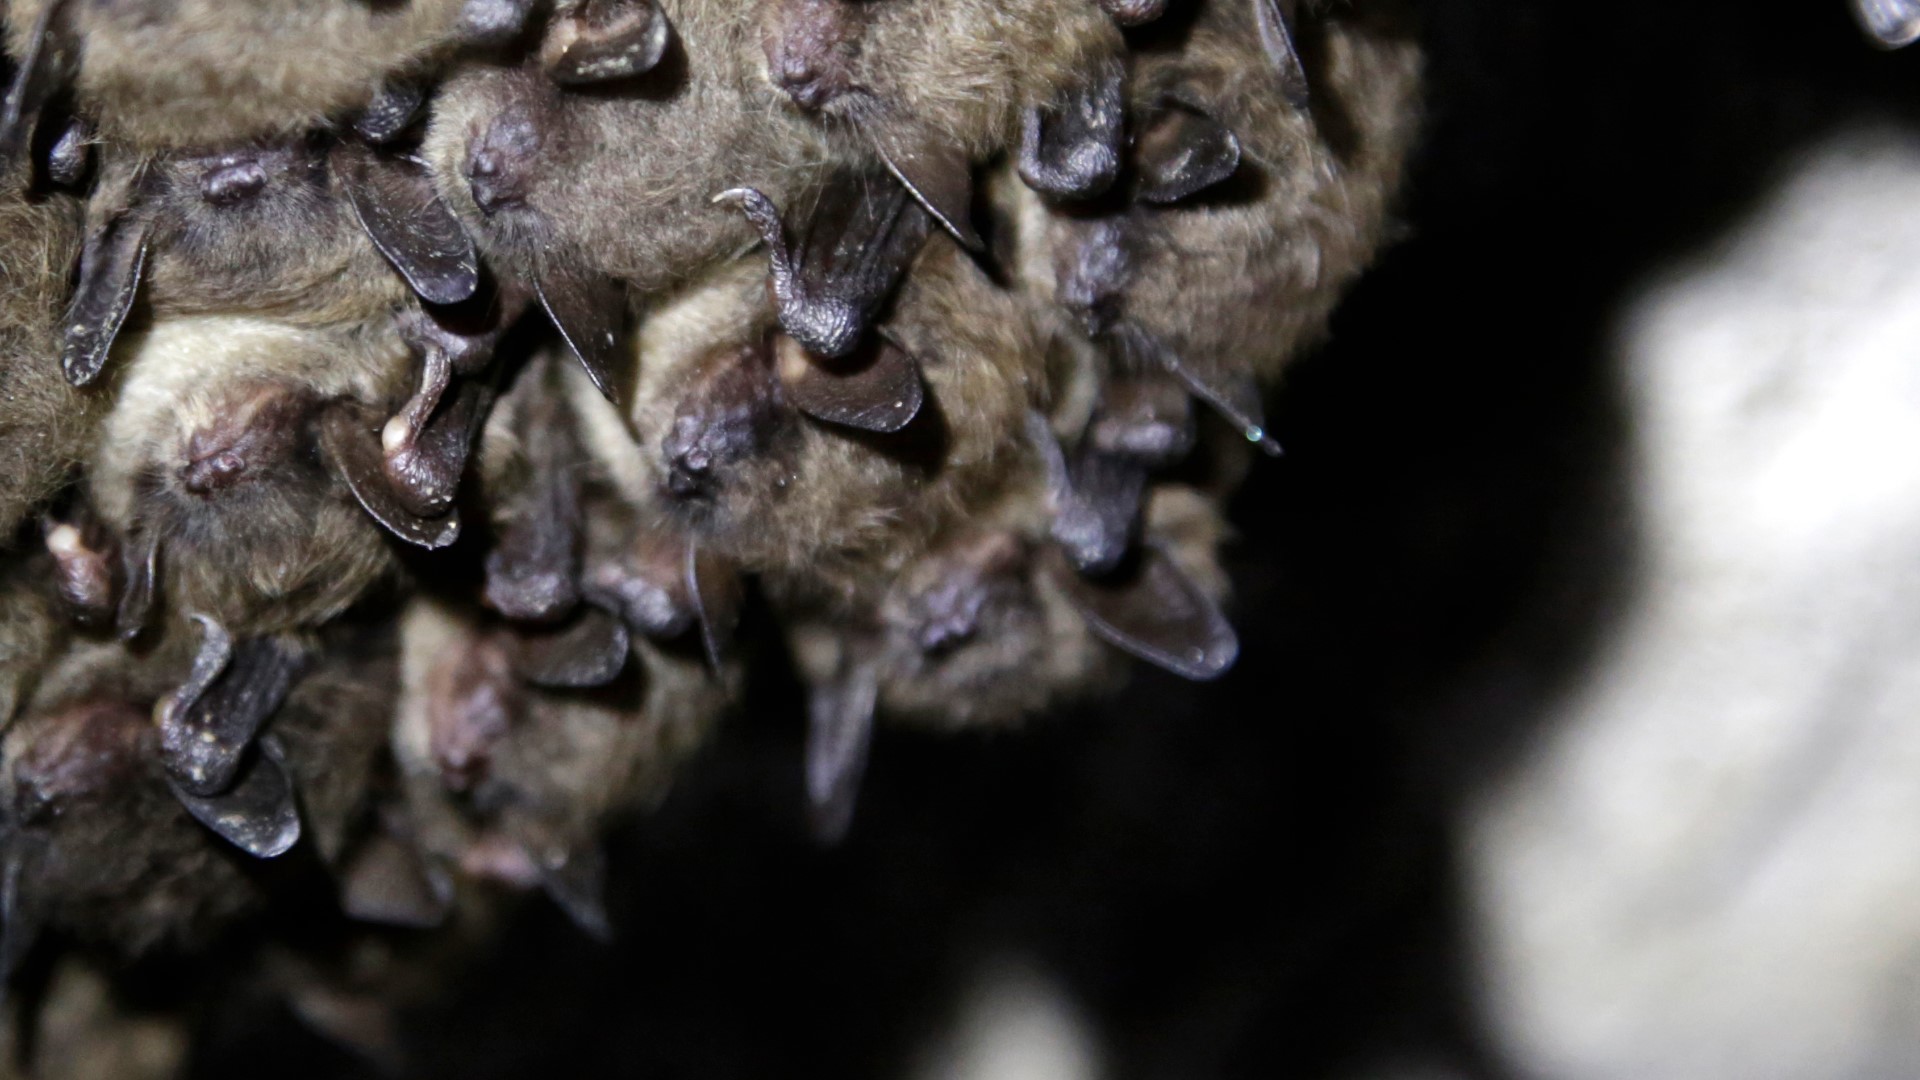 Scientists studying bat species that have been hit hard by the fungus that causes white nose syndrome say there is a glimmer of good news.